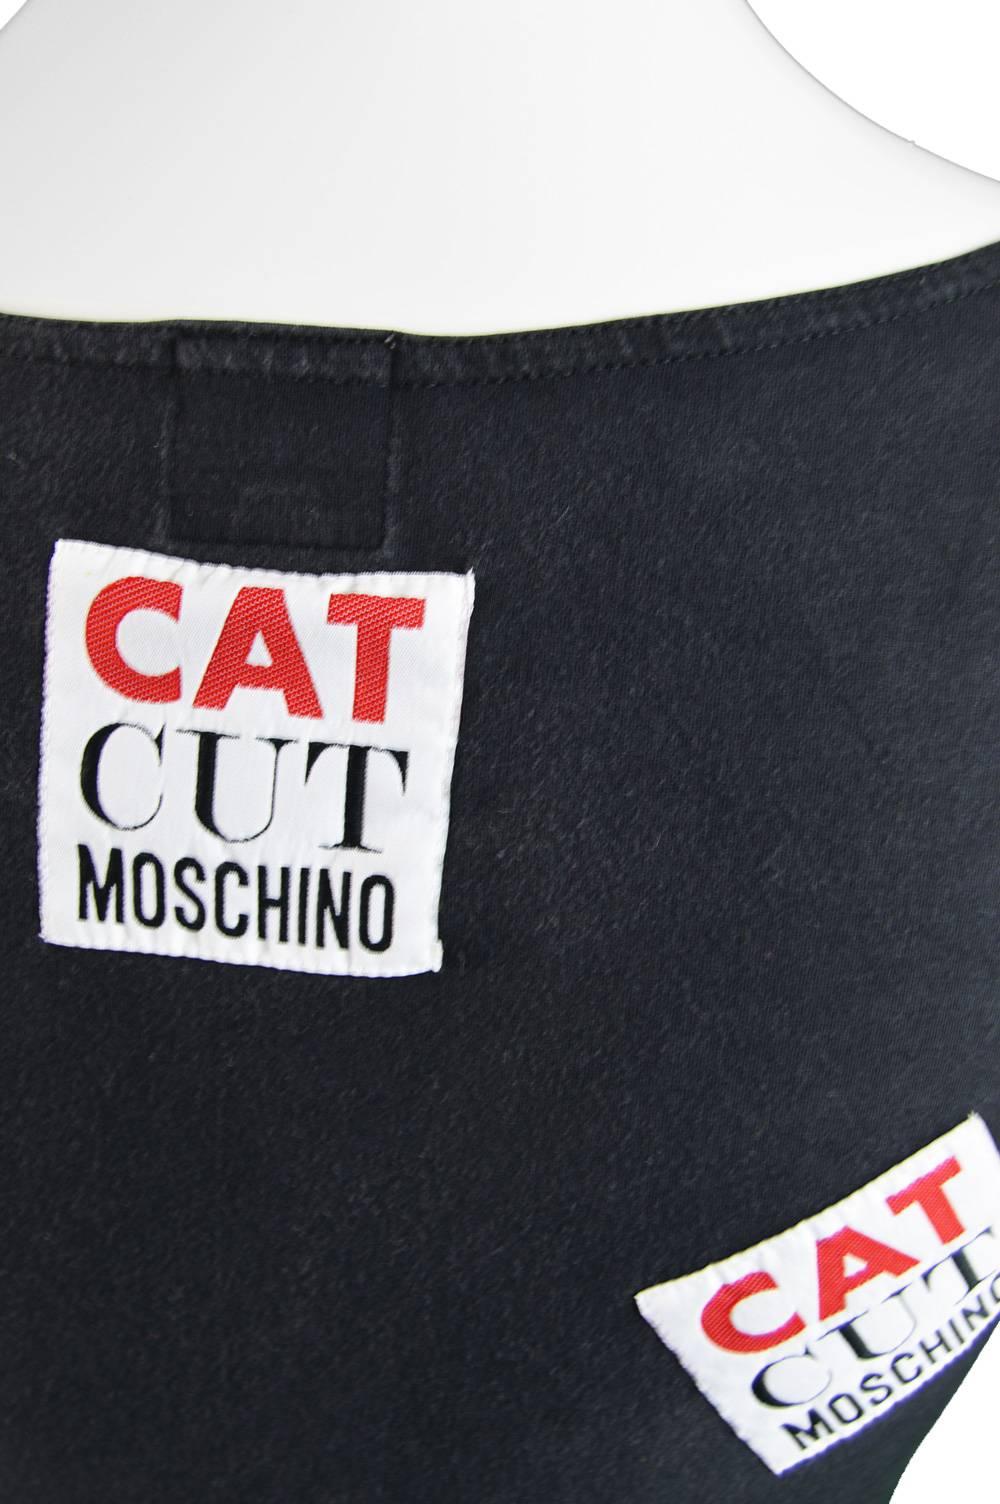 Women's Moschino Vintage 'Cat Cut Moschino' Patch Bodycon Dress, 1990s  For Sale